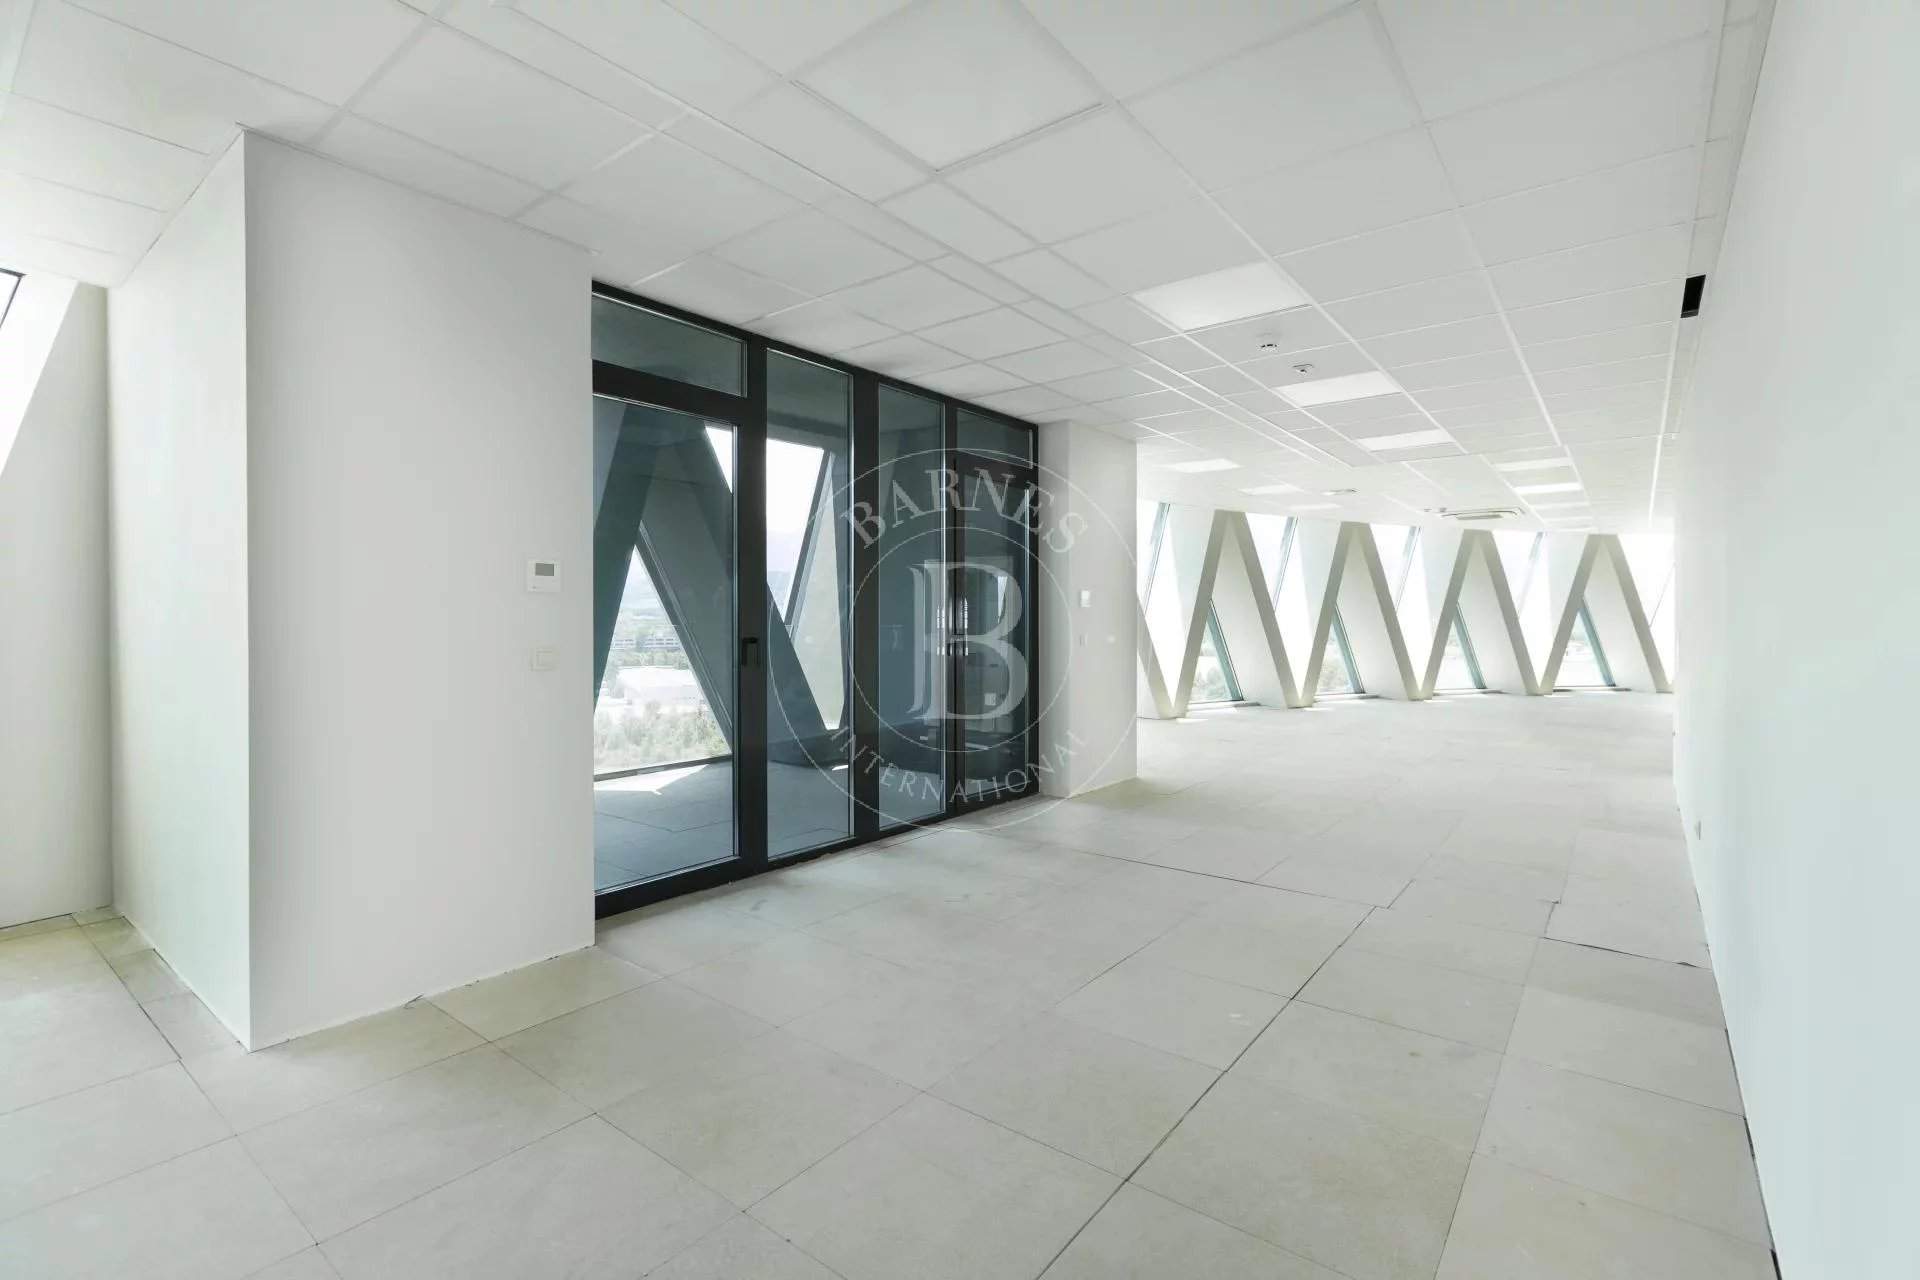 Sofia  - Offices  - picture 6